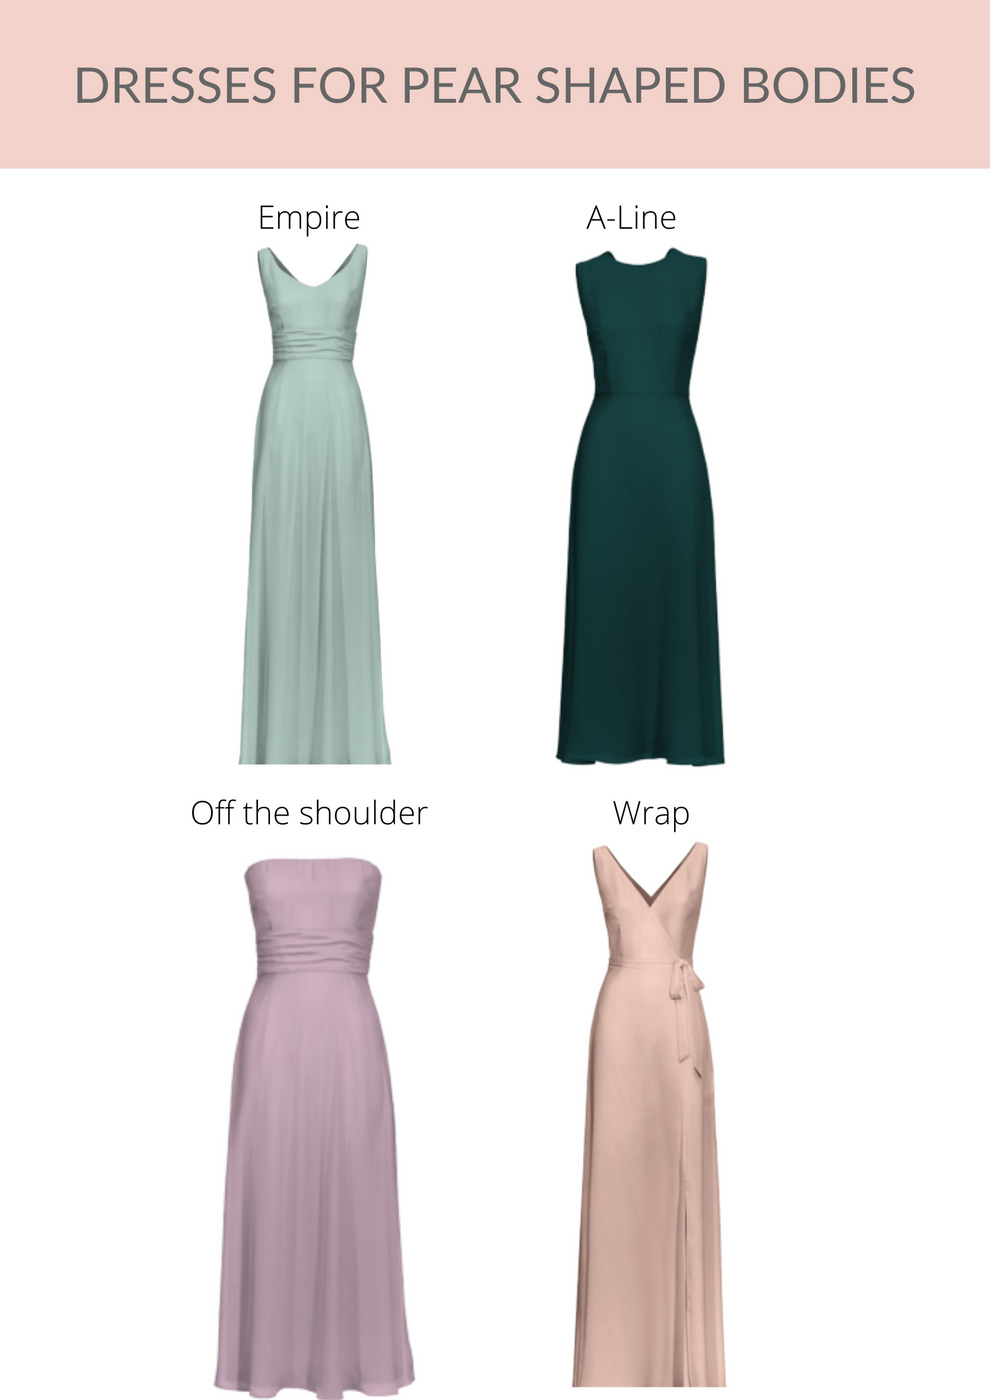 Dresses for the Pear Shaped Body